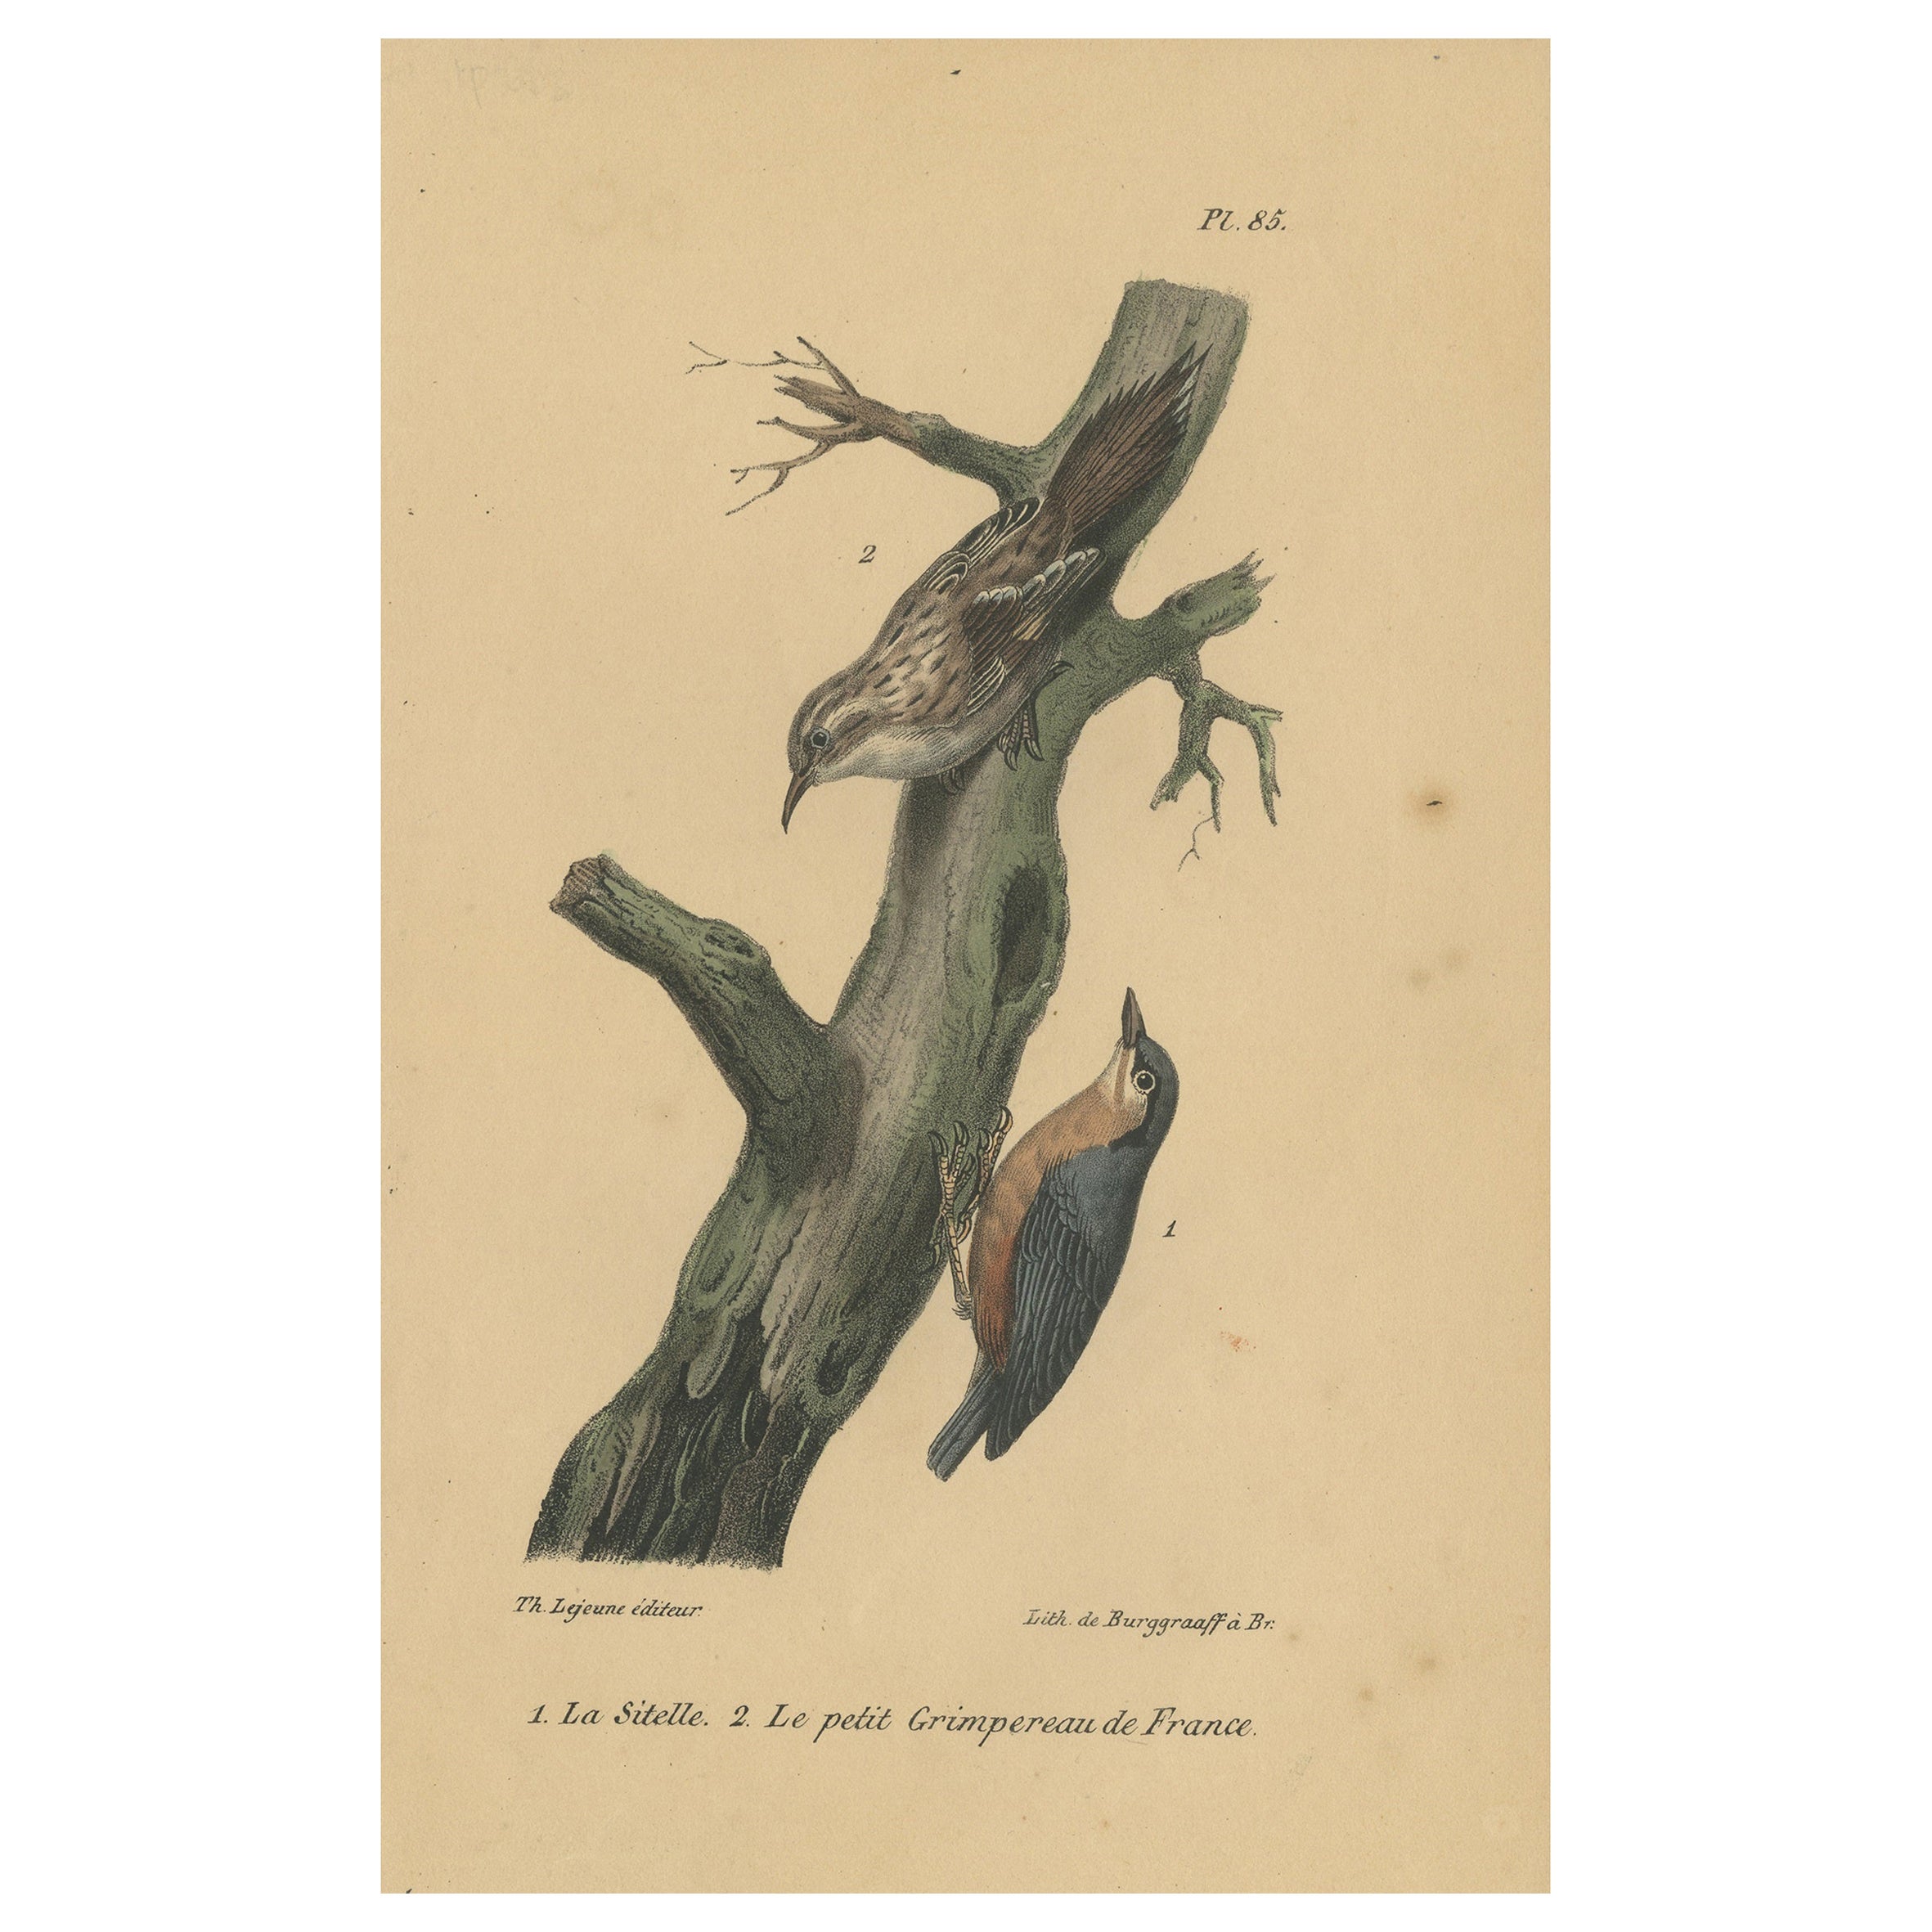 Pl. 85 Antique Bird Print of a Nuthatch and Creeper by Lejeune 'c.1830'